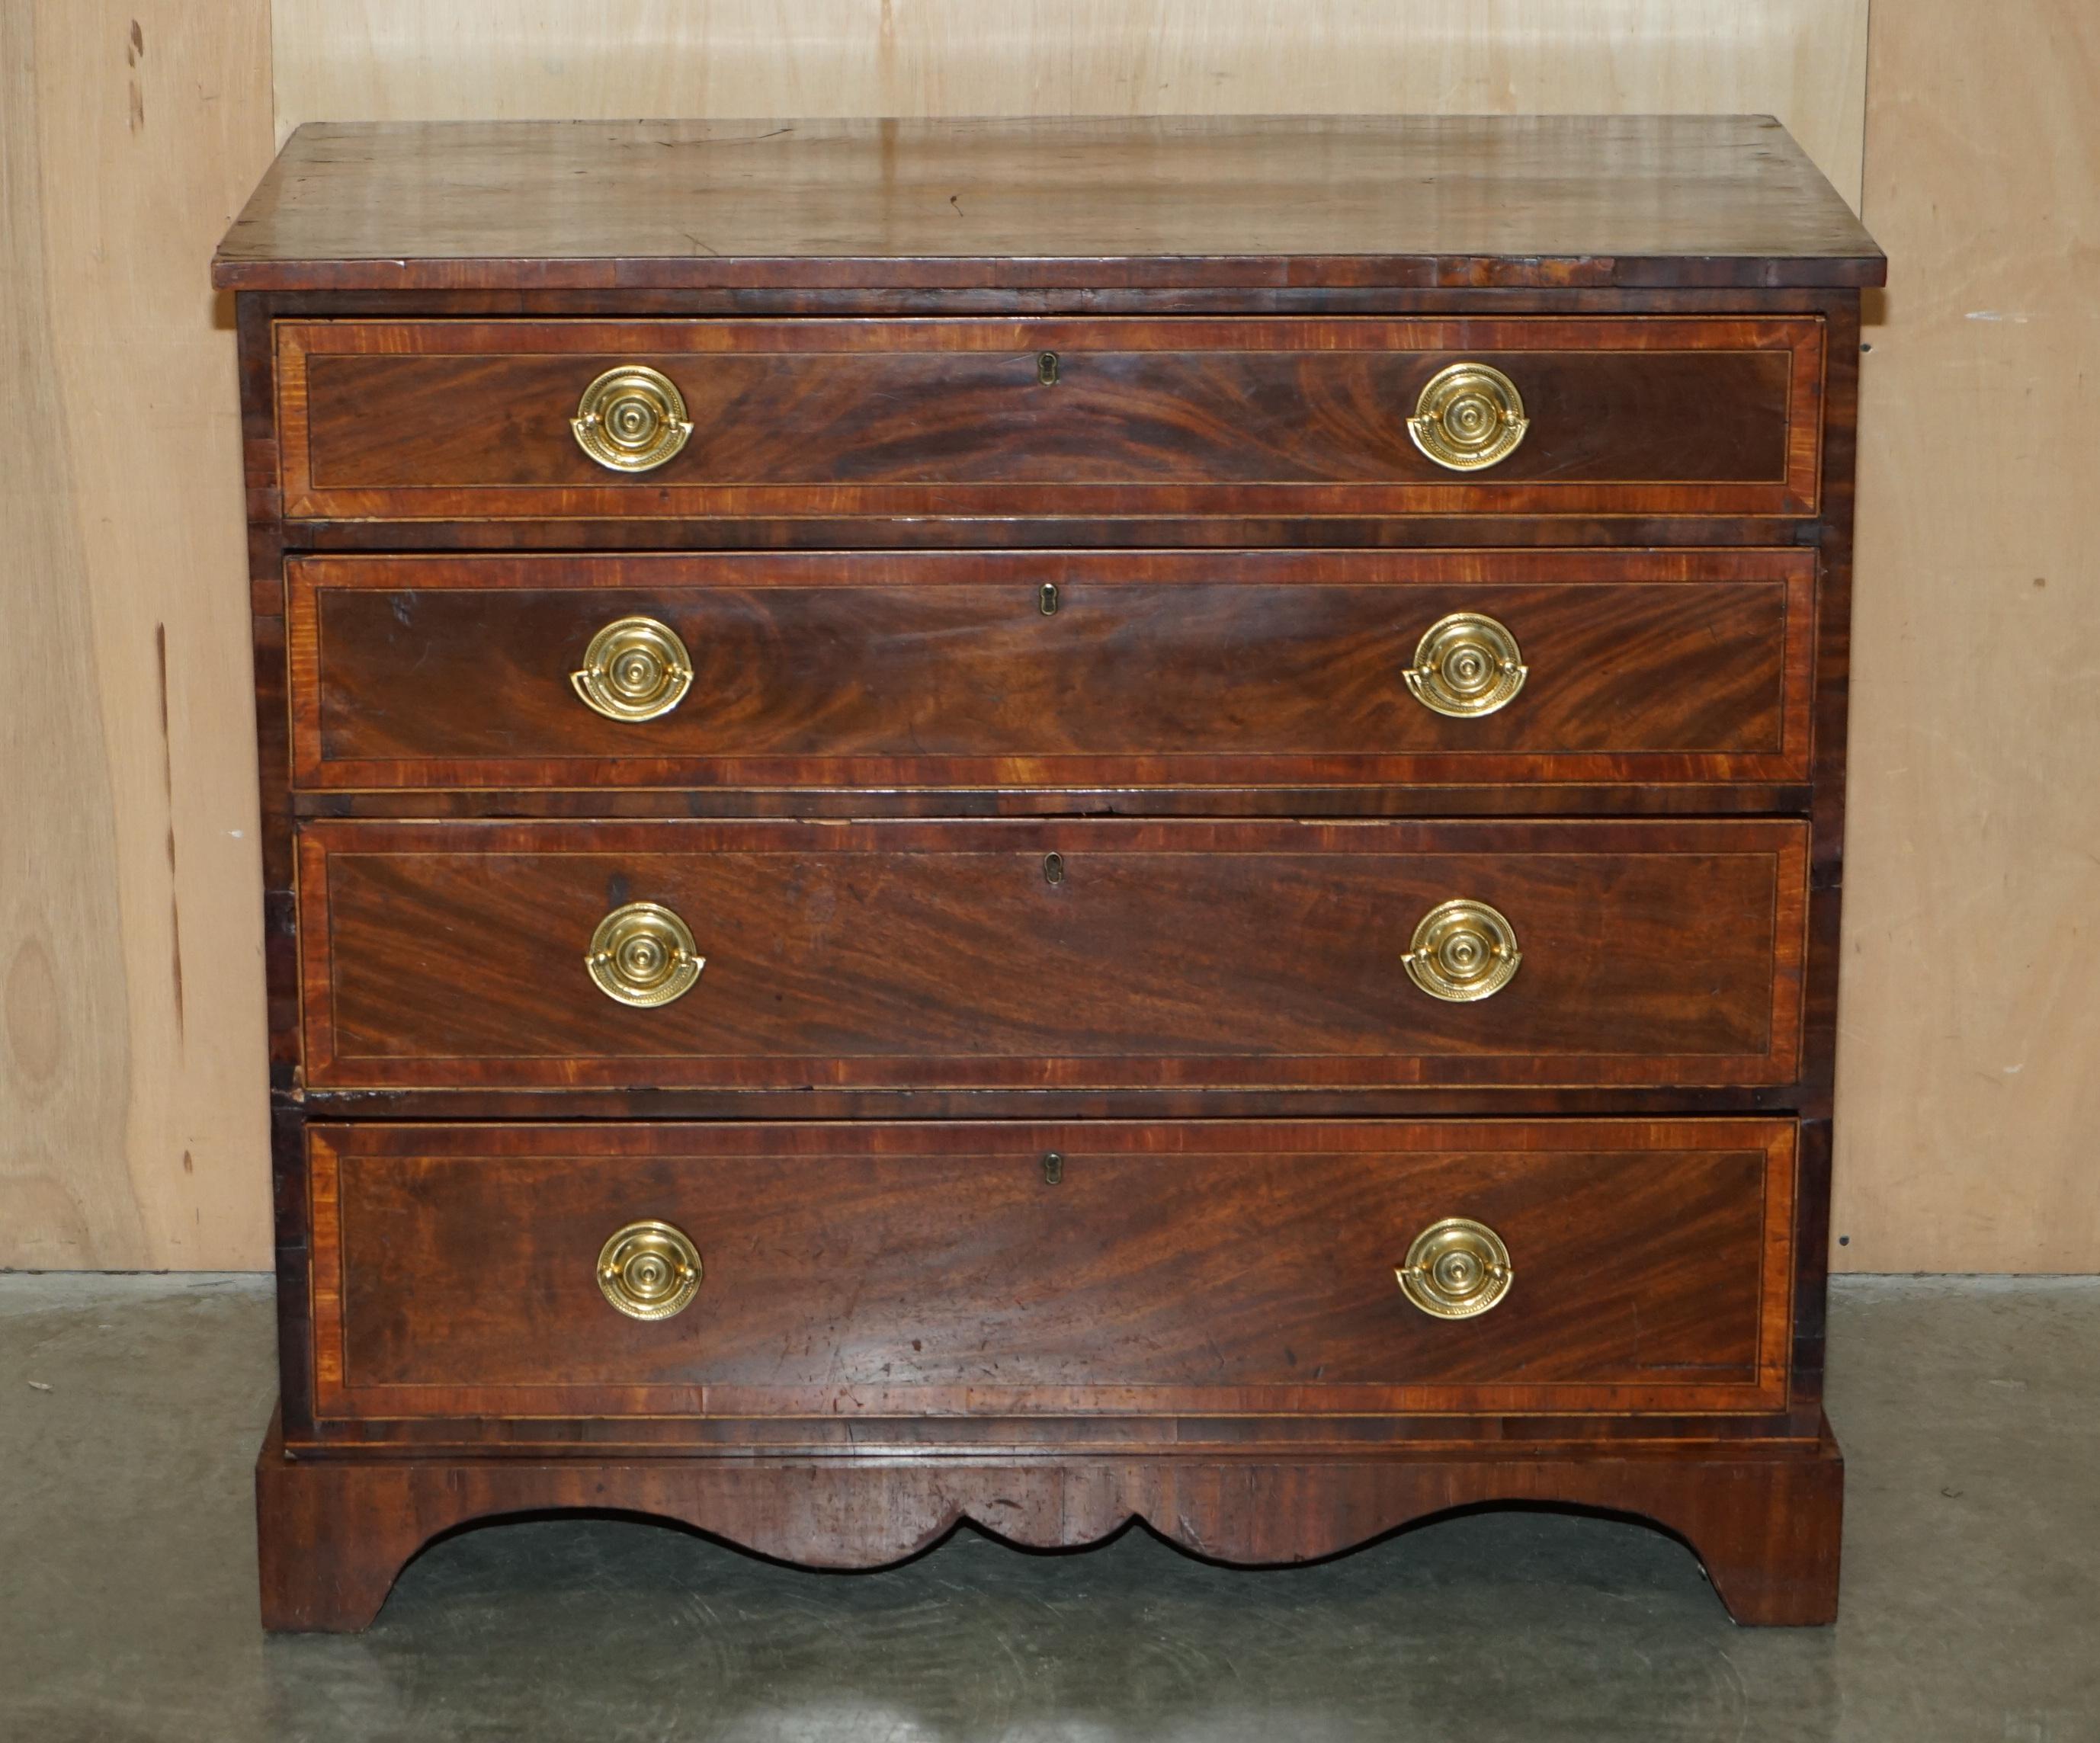 ANTiQUE GEORGE III BACHELORS CHEST OF DRAWERS ATTRIBUTED TO GILLOWS OF LANCASTER (Handgefertigt) im Angebot